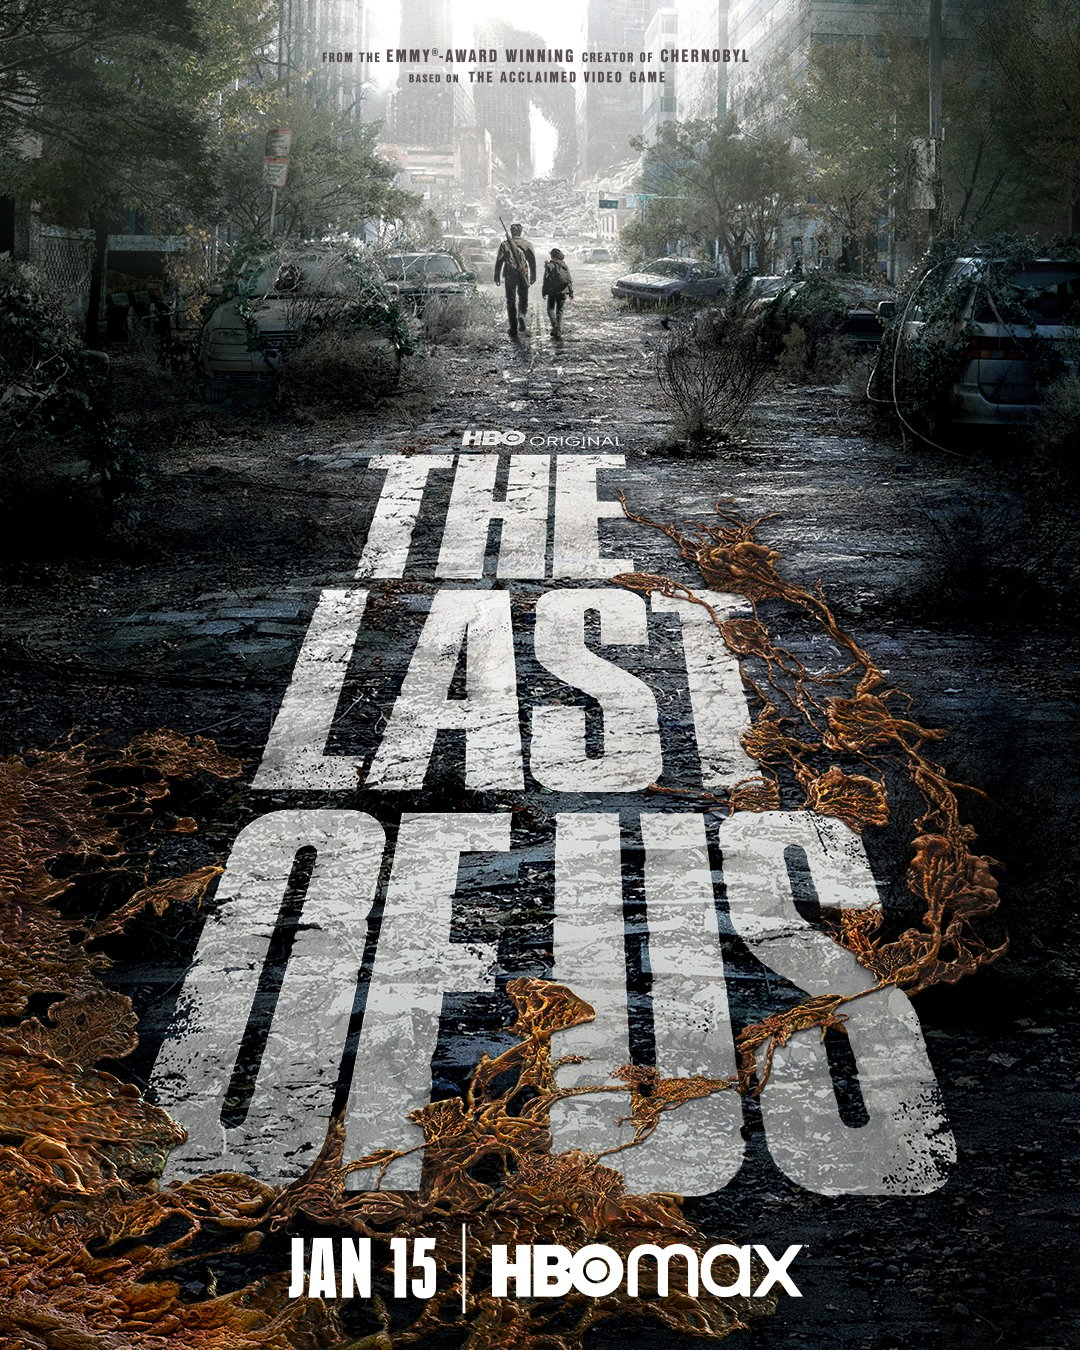 How to Watch 'The Last of Us' Season 1 Live Online Free: 2023